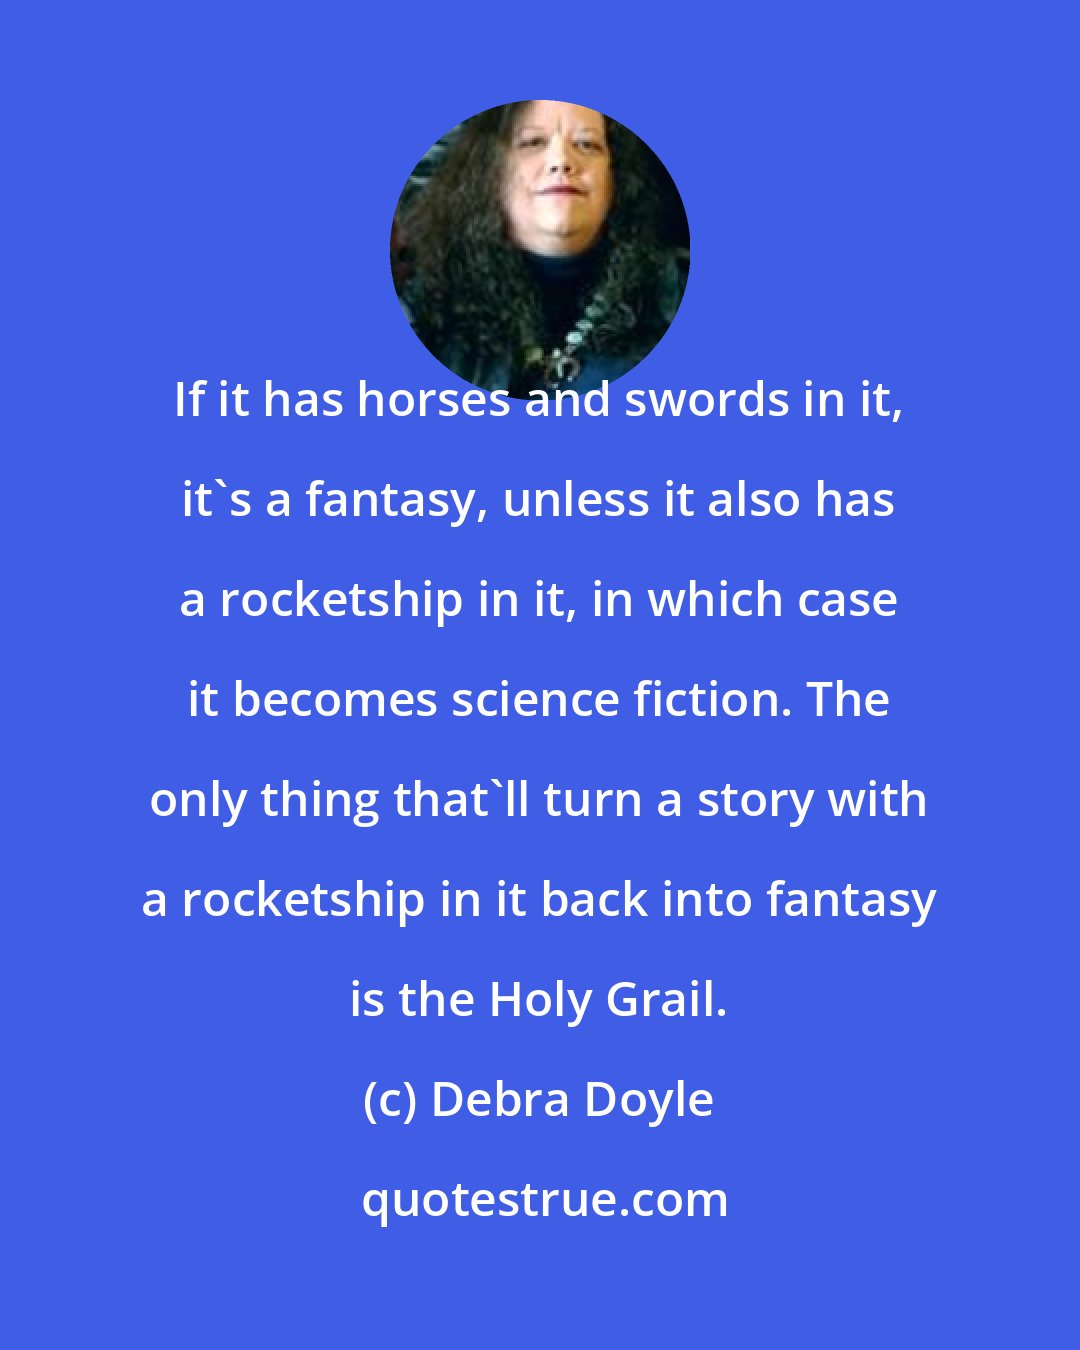 Debra Doyle: If it has horses and swords in it, it's a fantasy, unless it also has a rocketship in it, in which case it becomes science fiction. The only thing that'll turn a story with a rocketship in it back into fantasy is the Holy Grail.